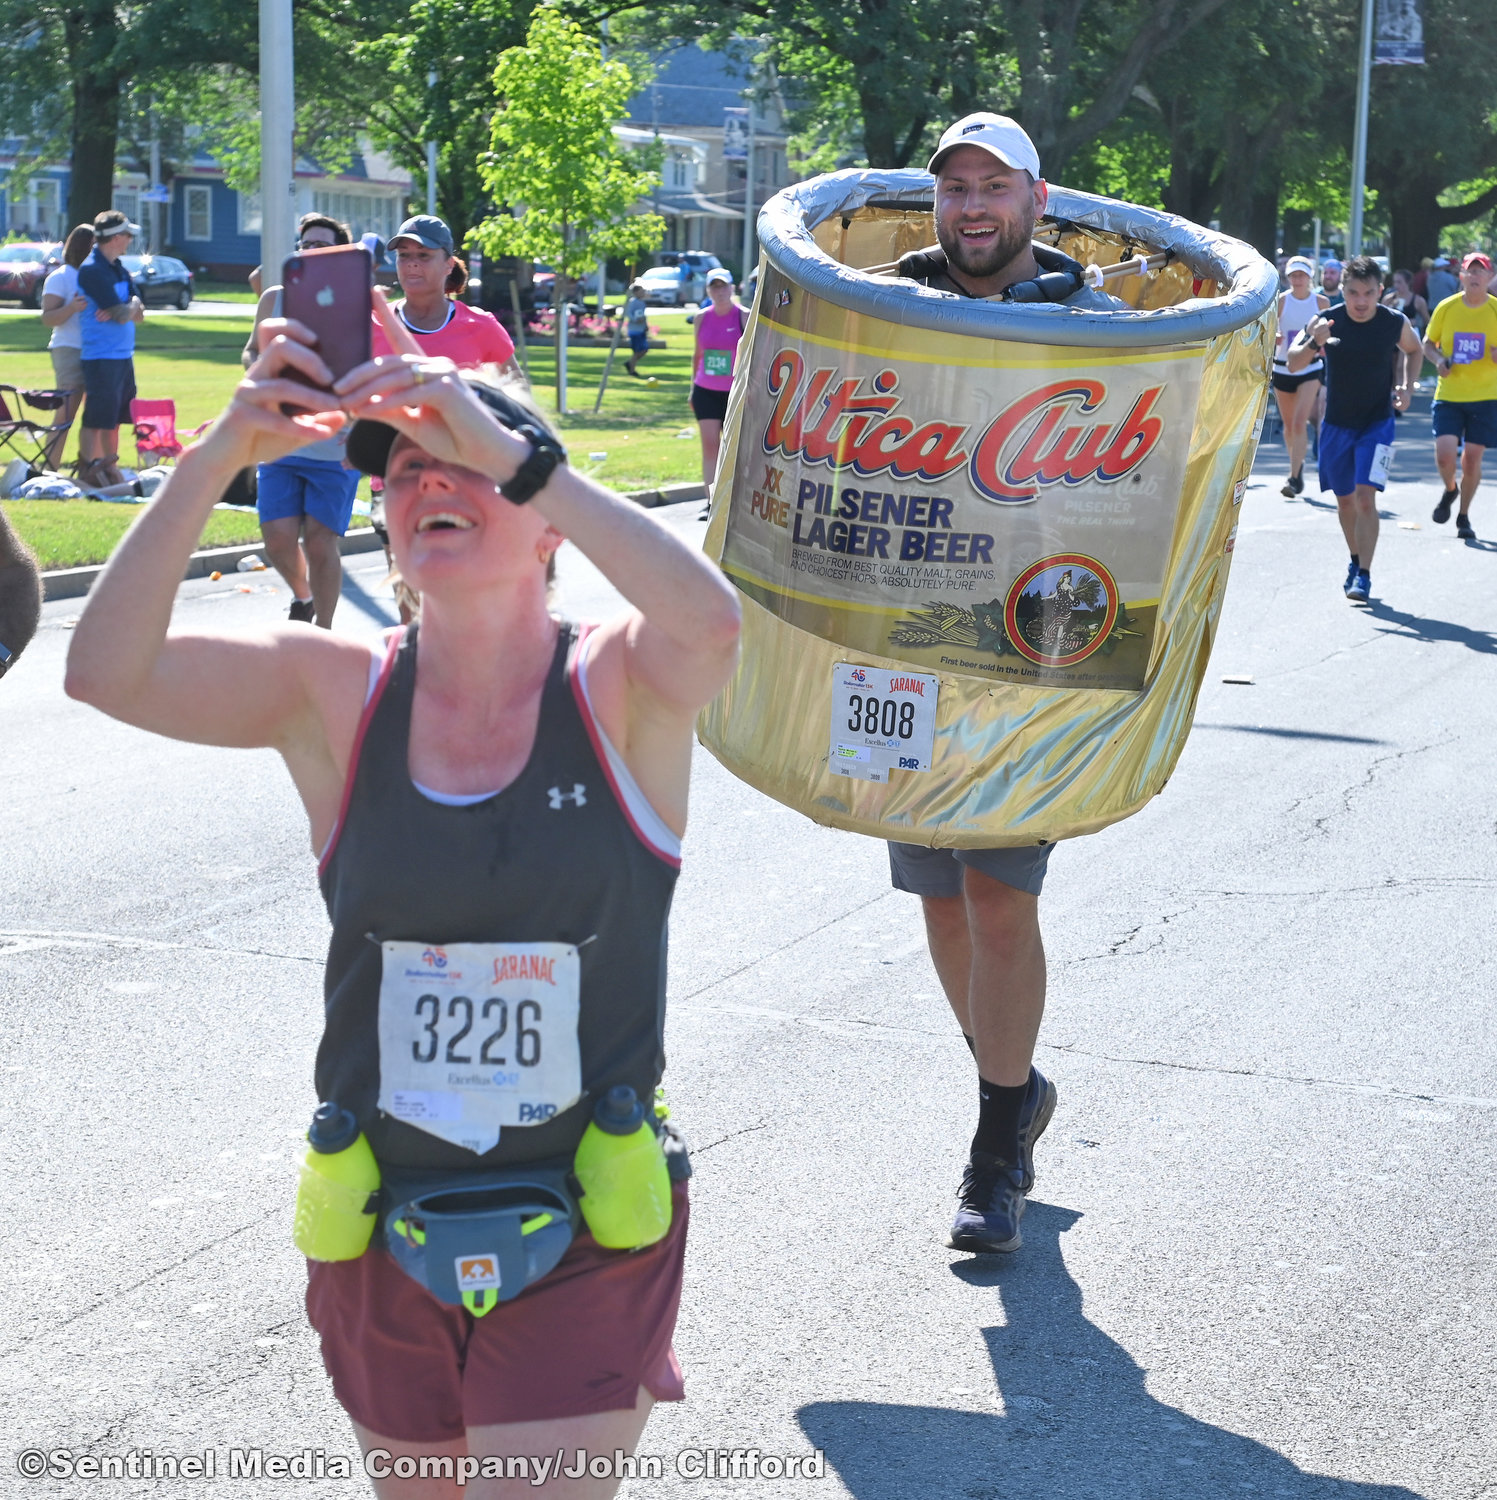 15k runner Lesley Allison of Lancaster, Mass., shoots a selfie with a runner dressed in a Utica Club beer can outfit on Memorial Parkway during the 45th Boilermaker Road Race.